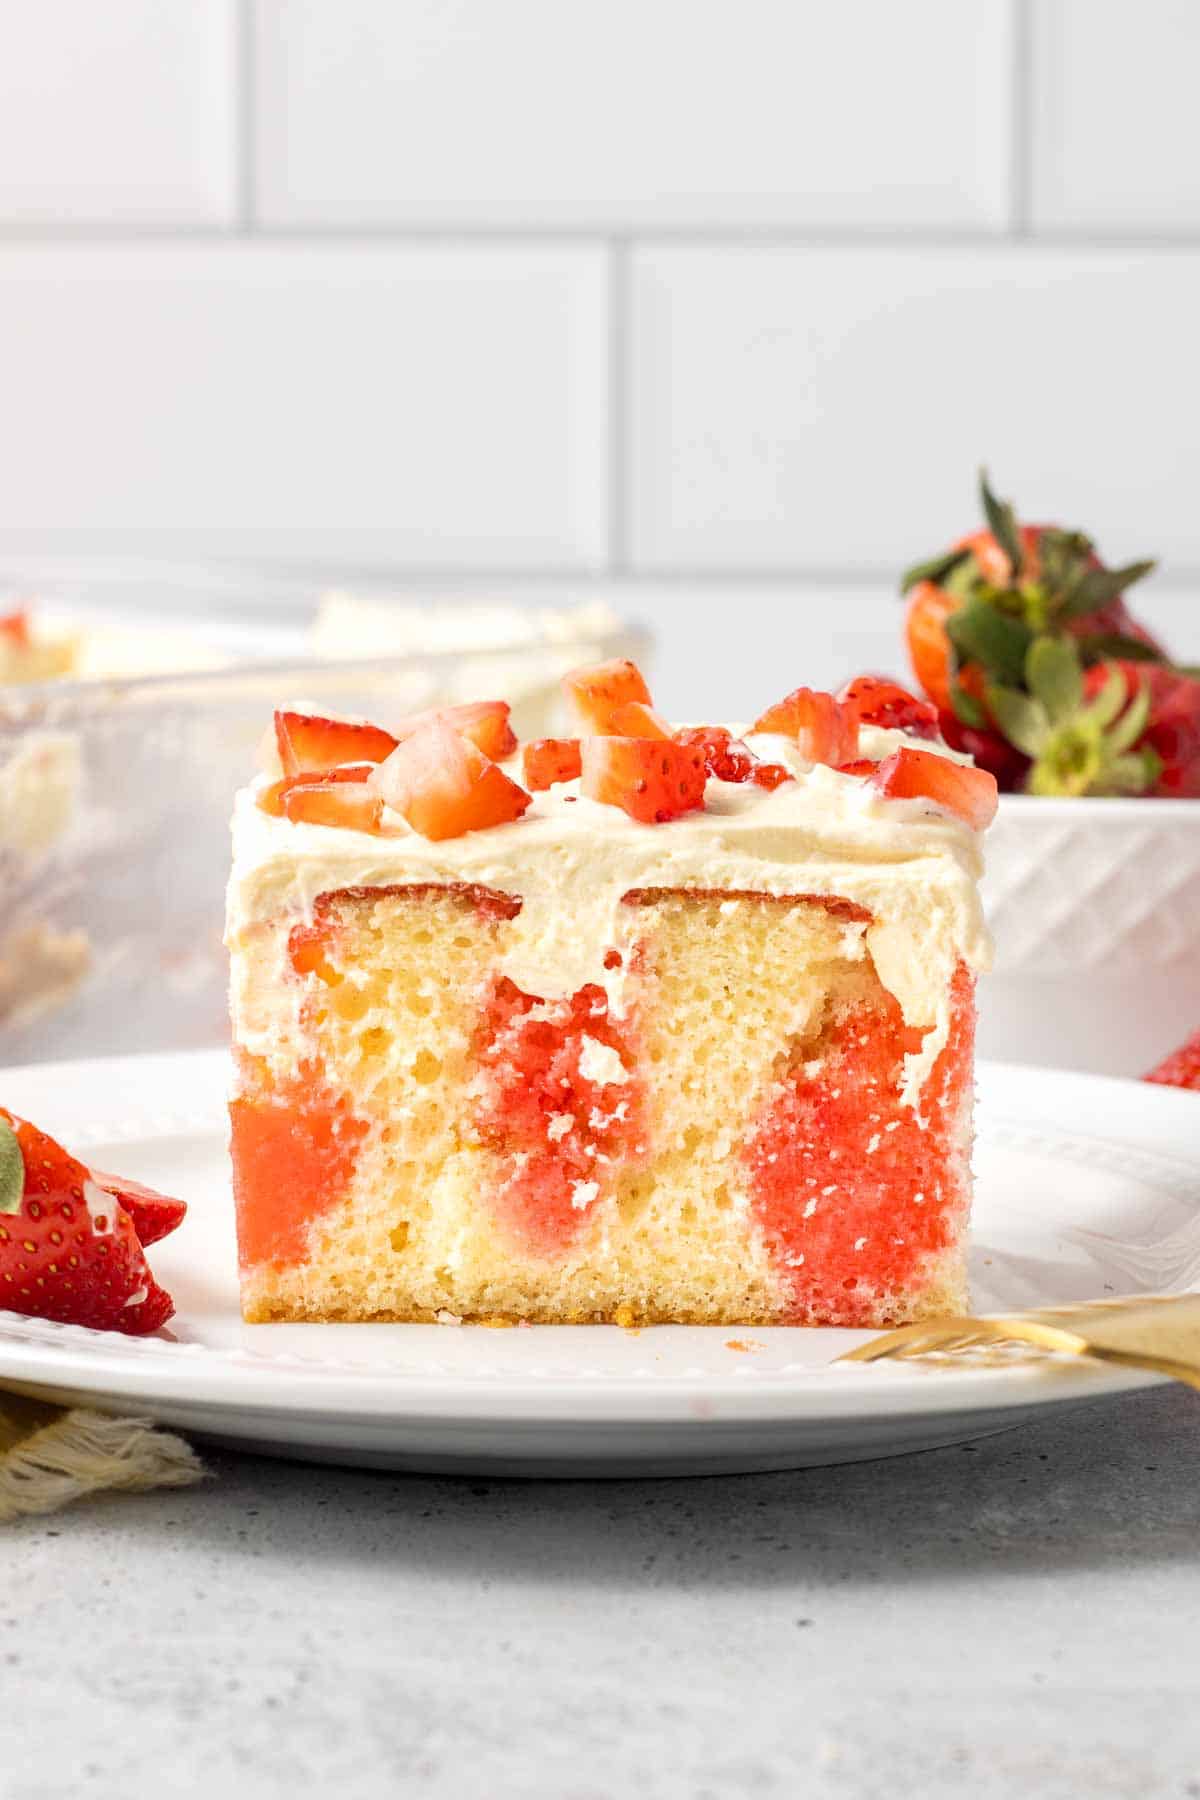 A fork resting on a plate with a slice of jello cake topped with strawberries.